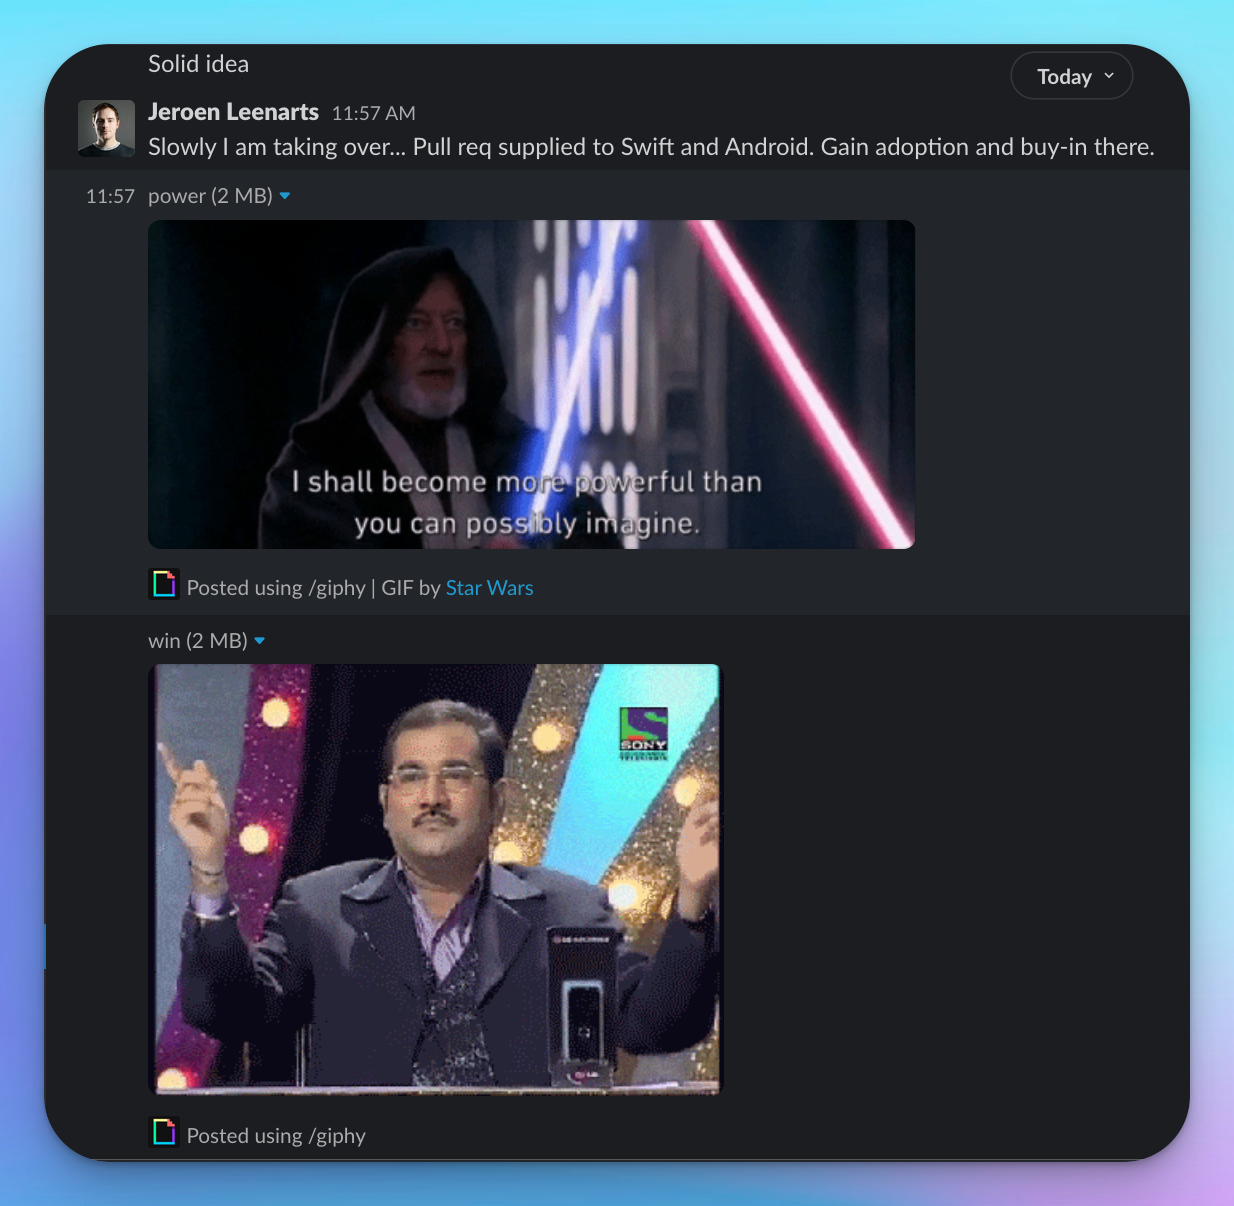 Picture of a Slack conversation with Obiwan Kenobi claiming the gaining of power if he is striken down followed by a gif of a man winning in a gameshow and doing a really silly victory dance.